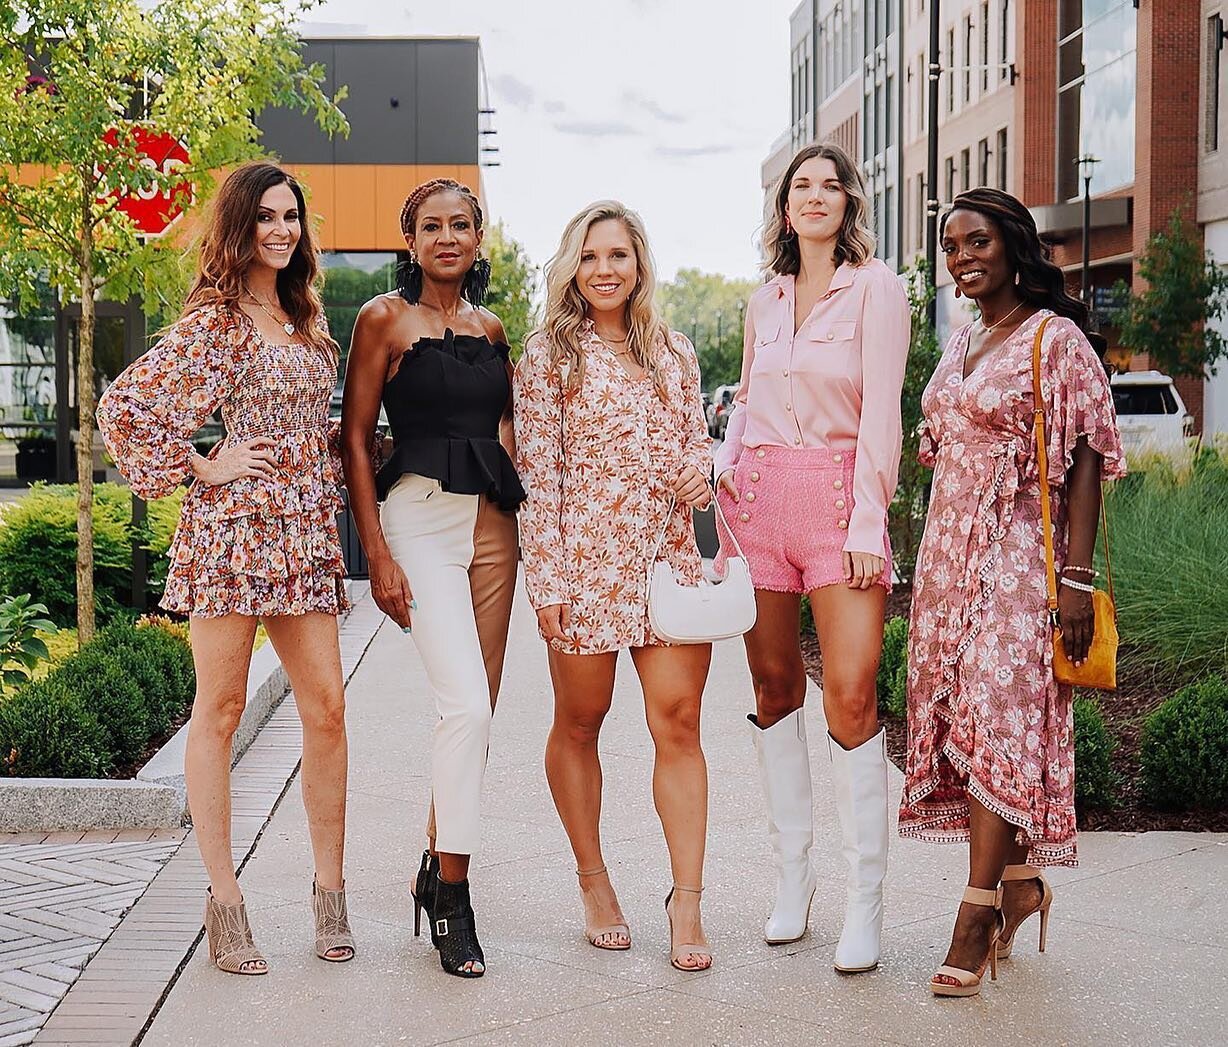 Some of our favorite local boutiques will be at @raleighfashionfest this Thursday! 🤩🤩

Don't miss out on one of our favorite local fashion, food, and shopping experiences in the Triangle! Come support 50+ local businesses and empower women, present